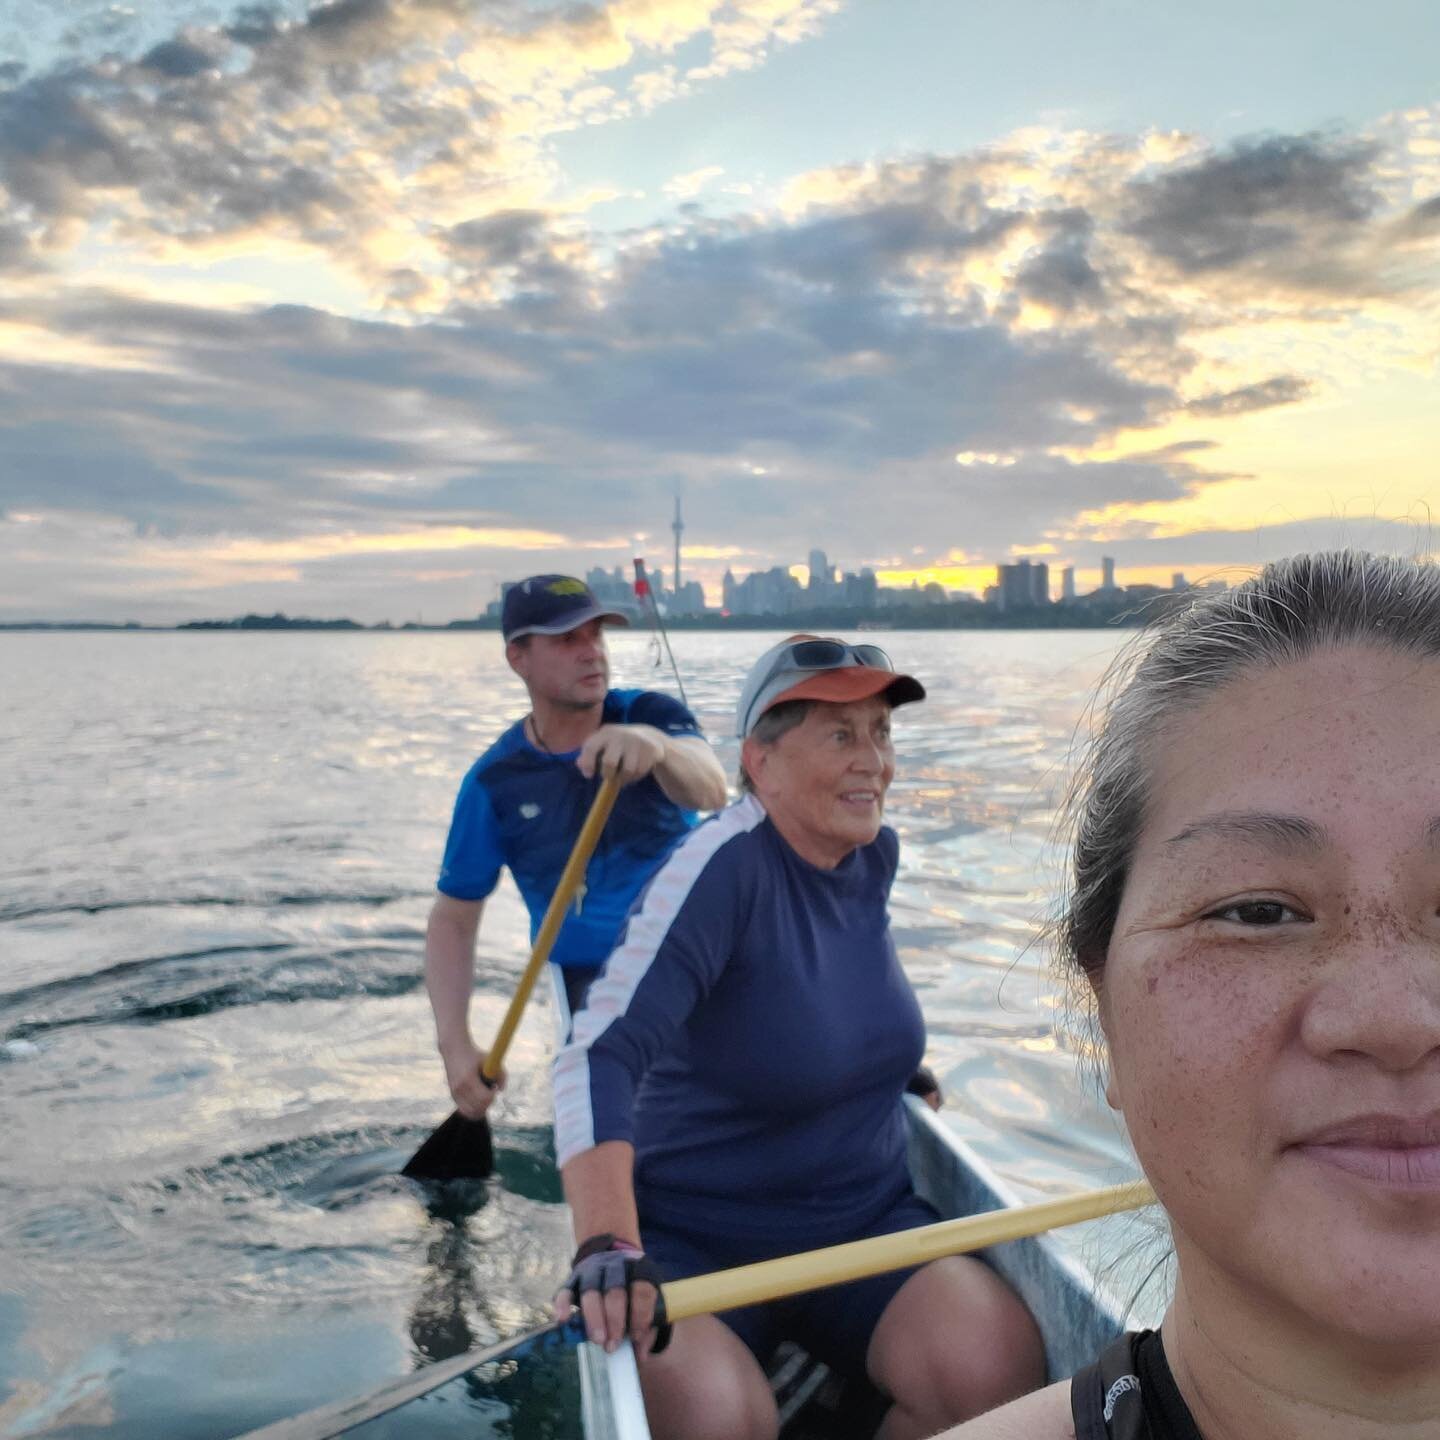 Yesterday morning 6am was my first OC6 paddle back with Maka Koa. It felt so good 😊 and such a great way to experience TO at sunrise